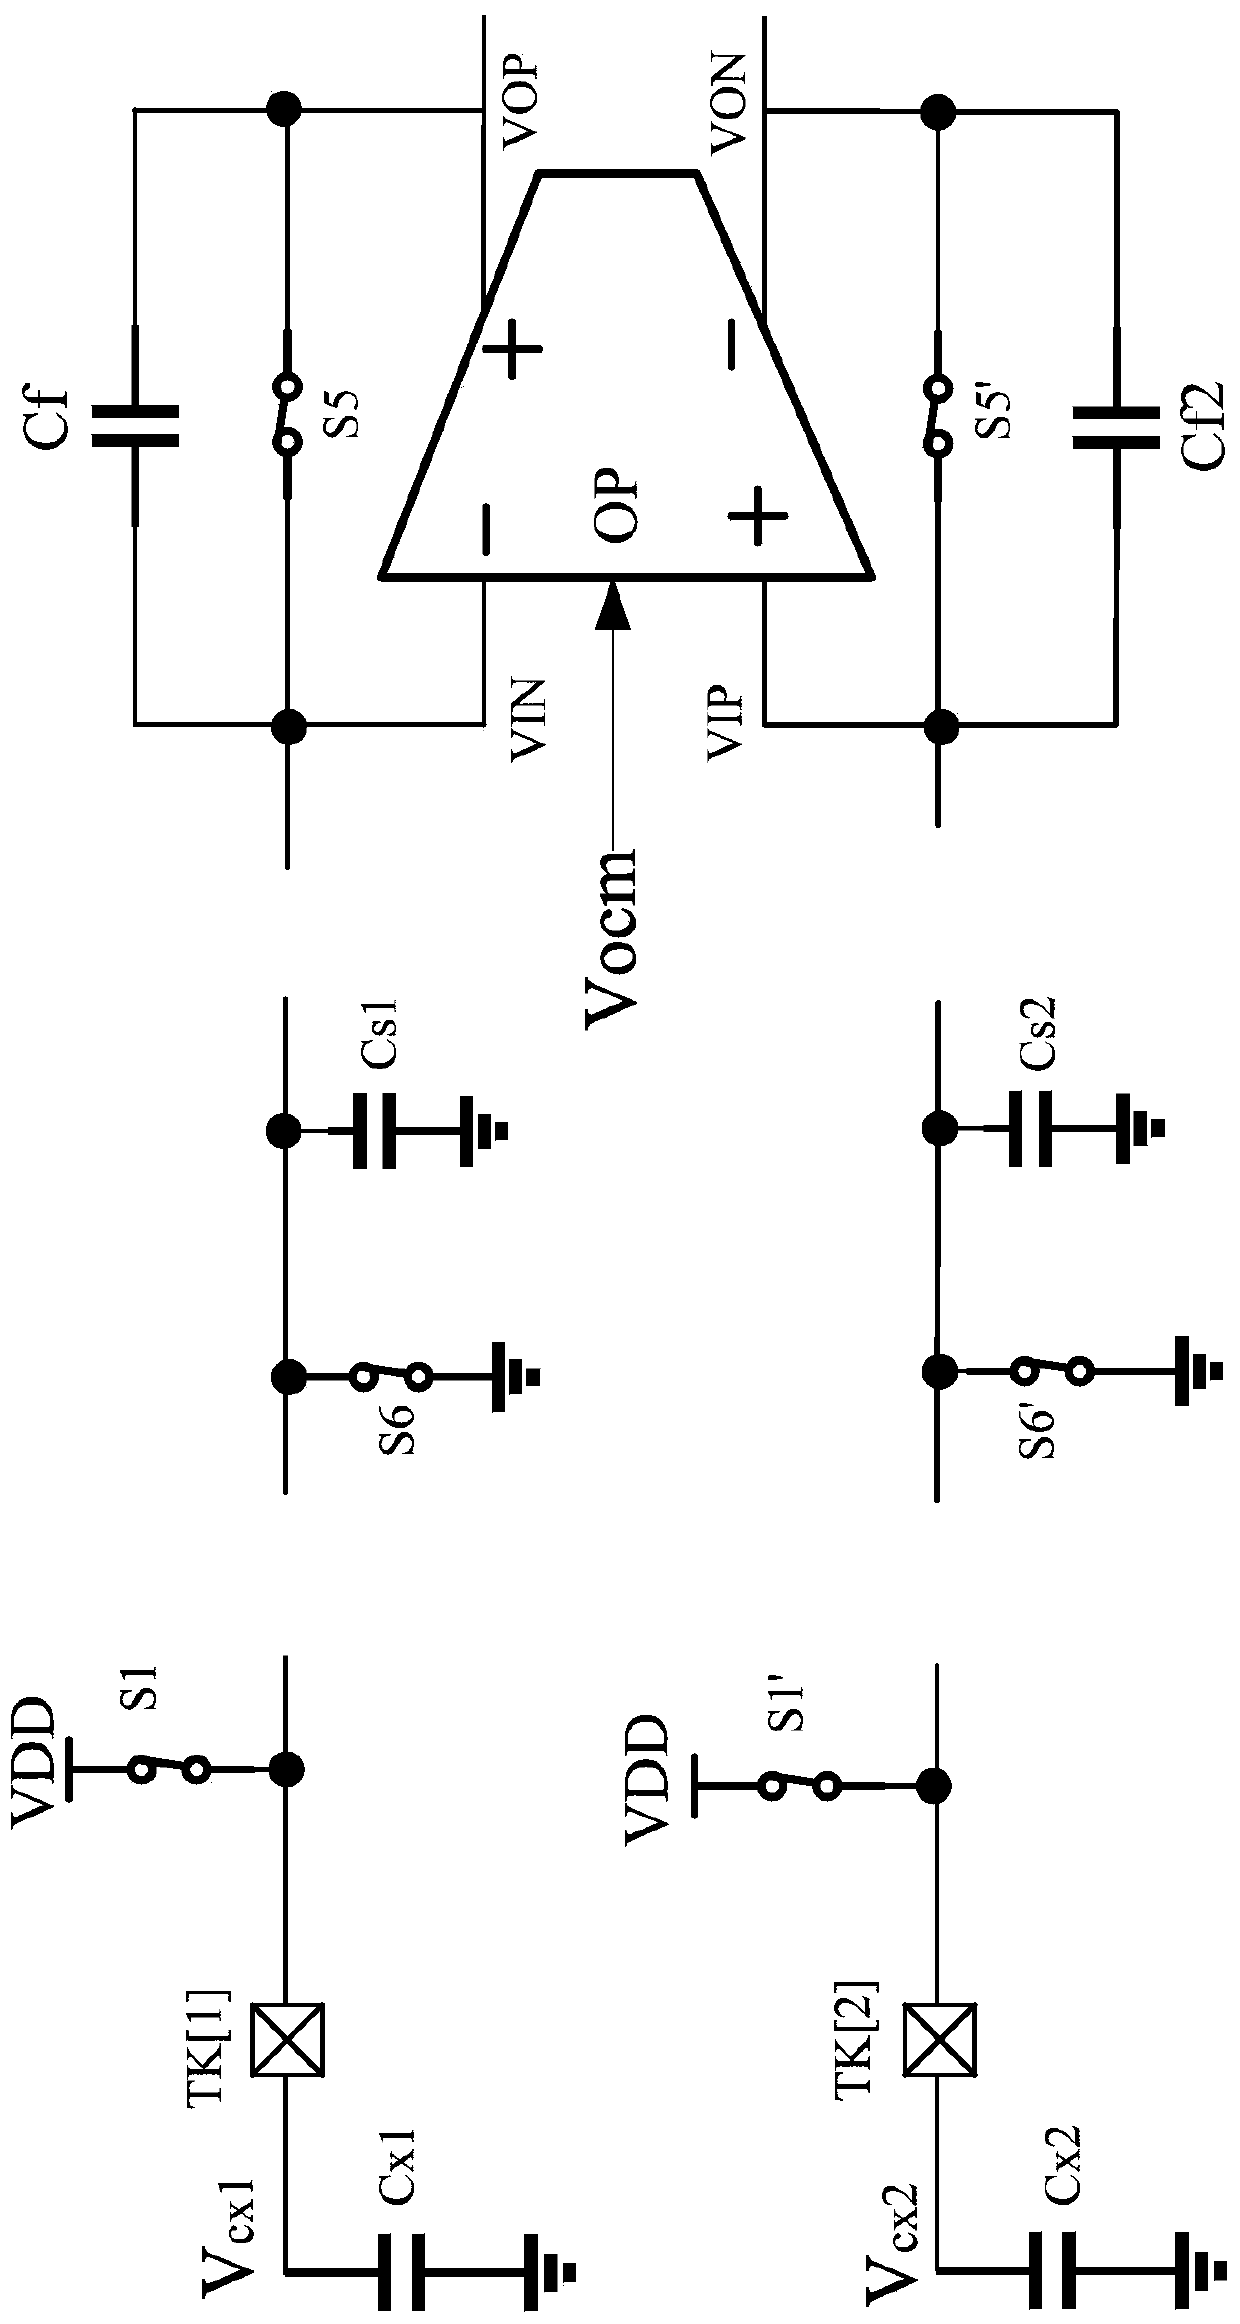 Differential touch detection circuit and touch judgment method adopting the differential touch detection circuit